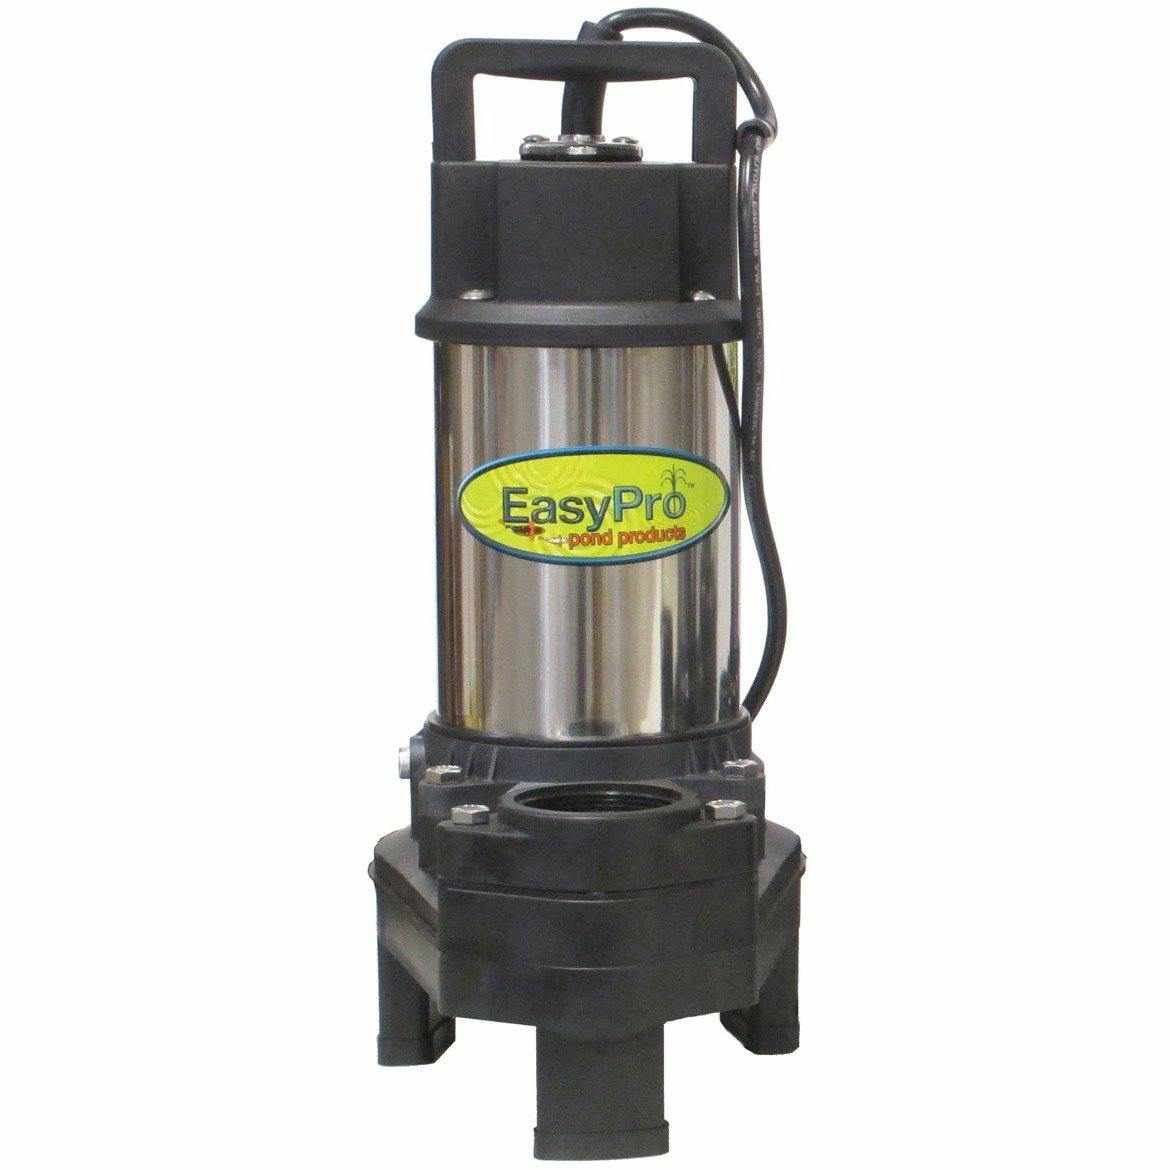 EasyPro TH250 Series 230V Stainless Steel Submersible Pumps - American Pond Supplies Easy Pro 230V TH250 Submersible Pump 4100 GPH / 20' ft Cord Submersible Pumps Submersible Pumps